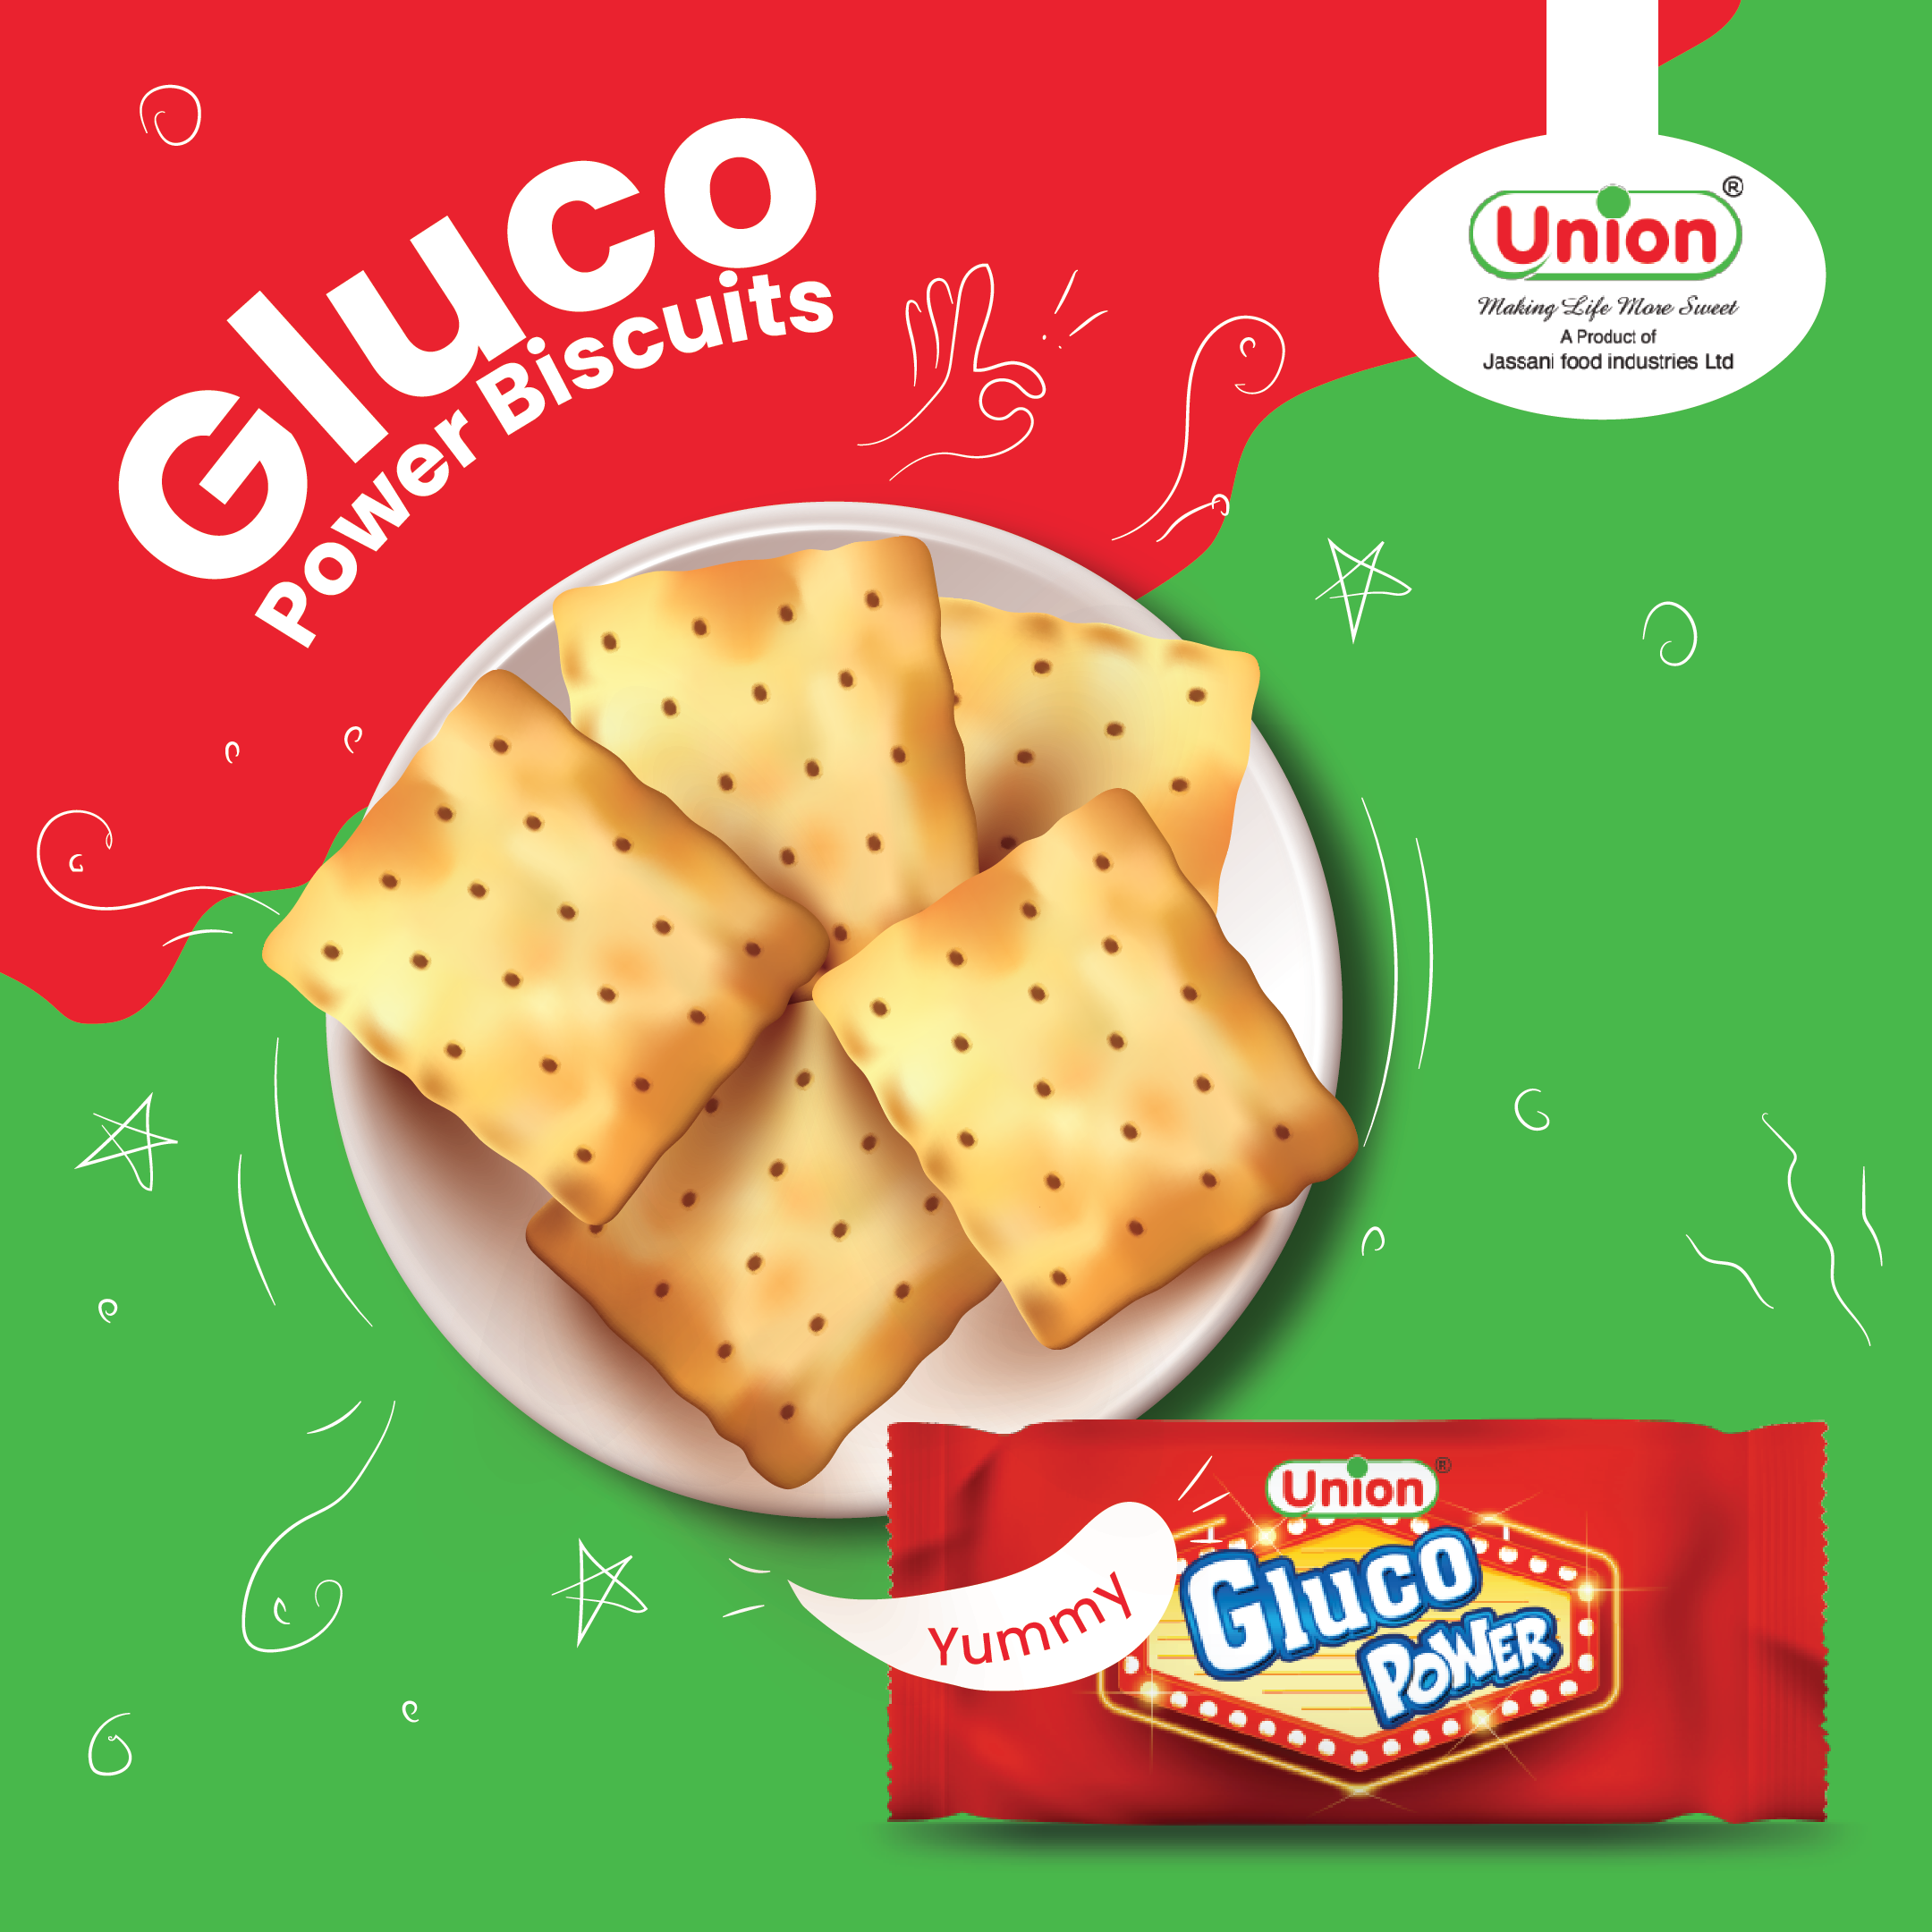 Union Gluco Power Biscuits